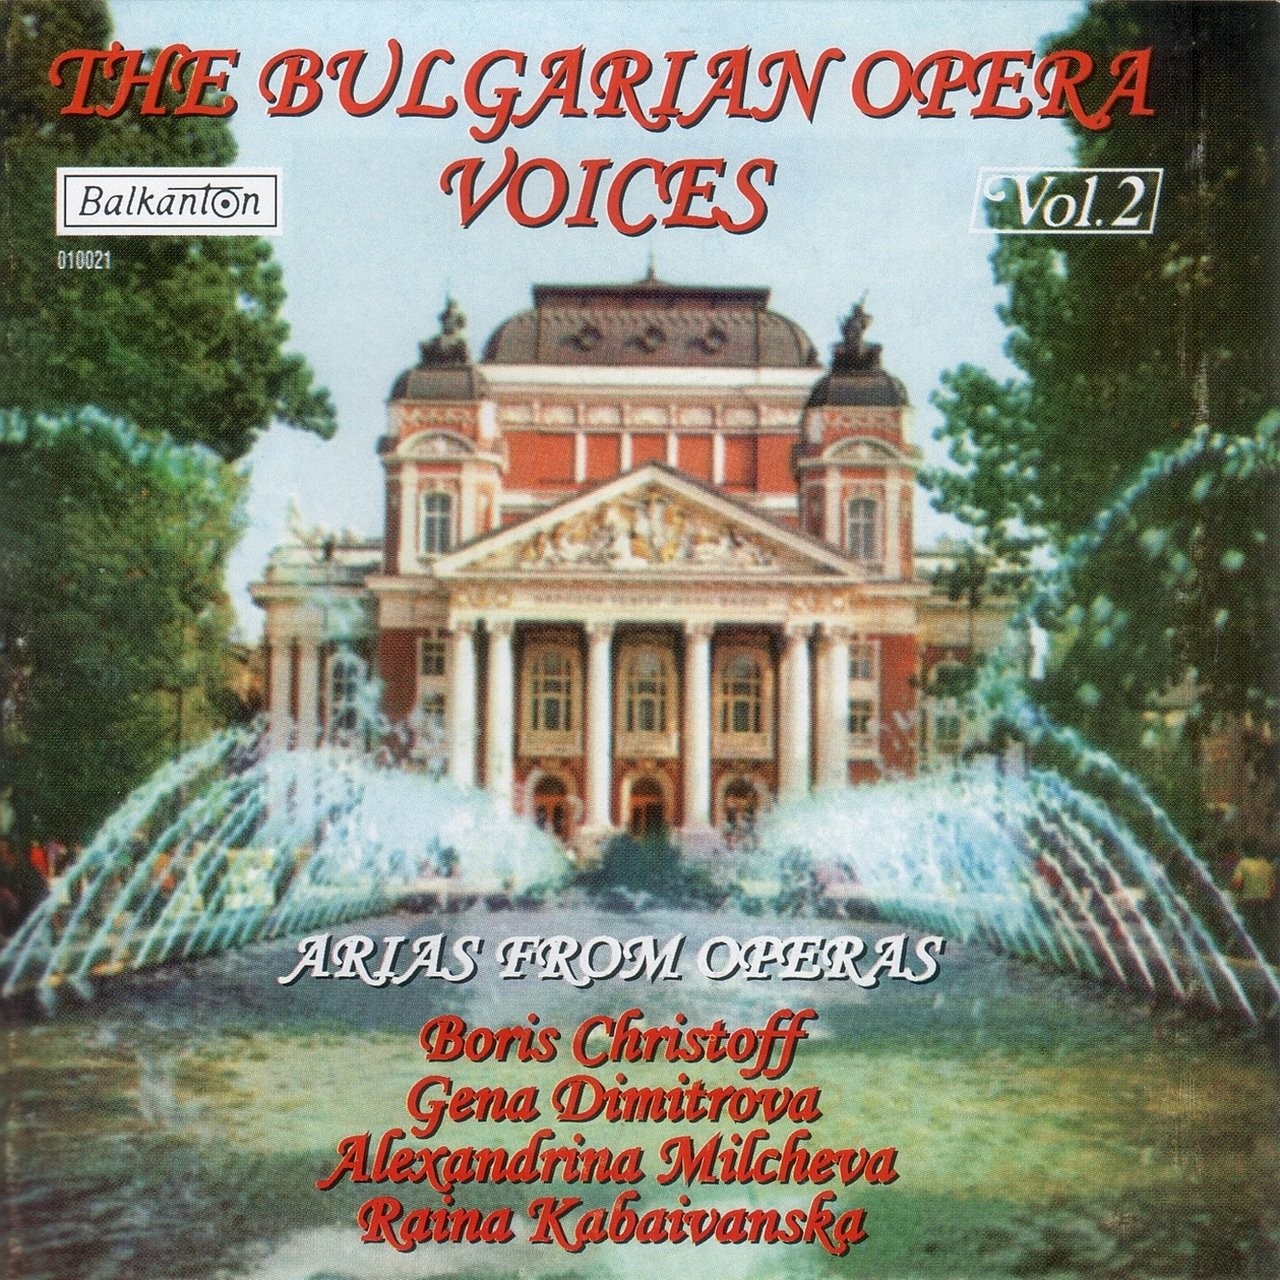 The Bulgarian opera voices. Vol 2. Arias from Operas